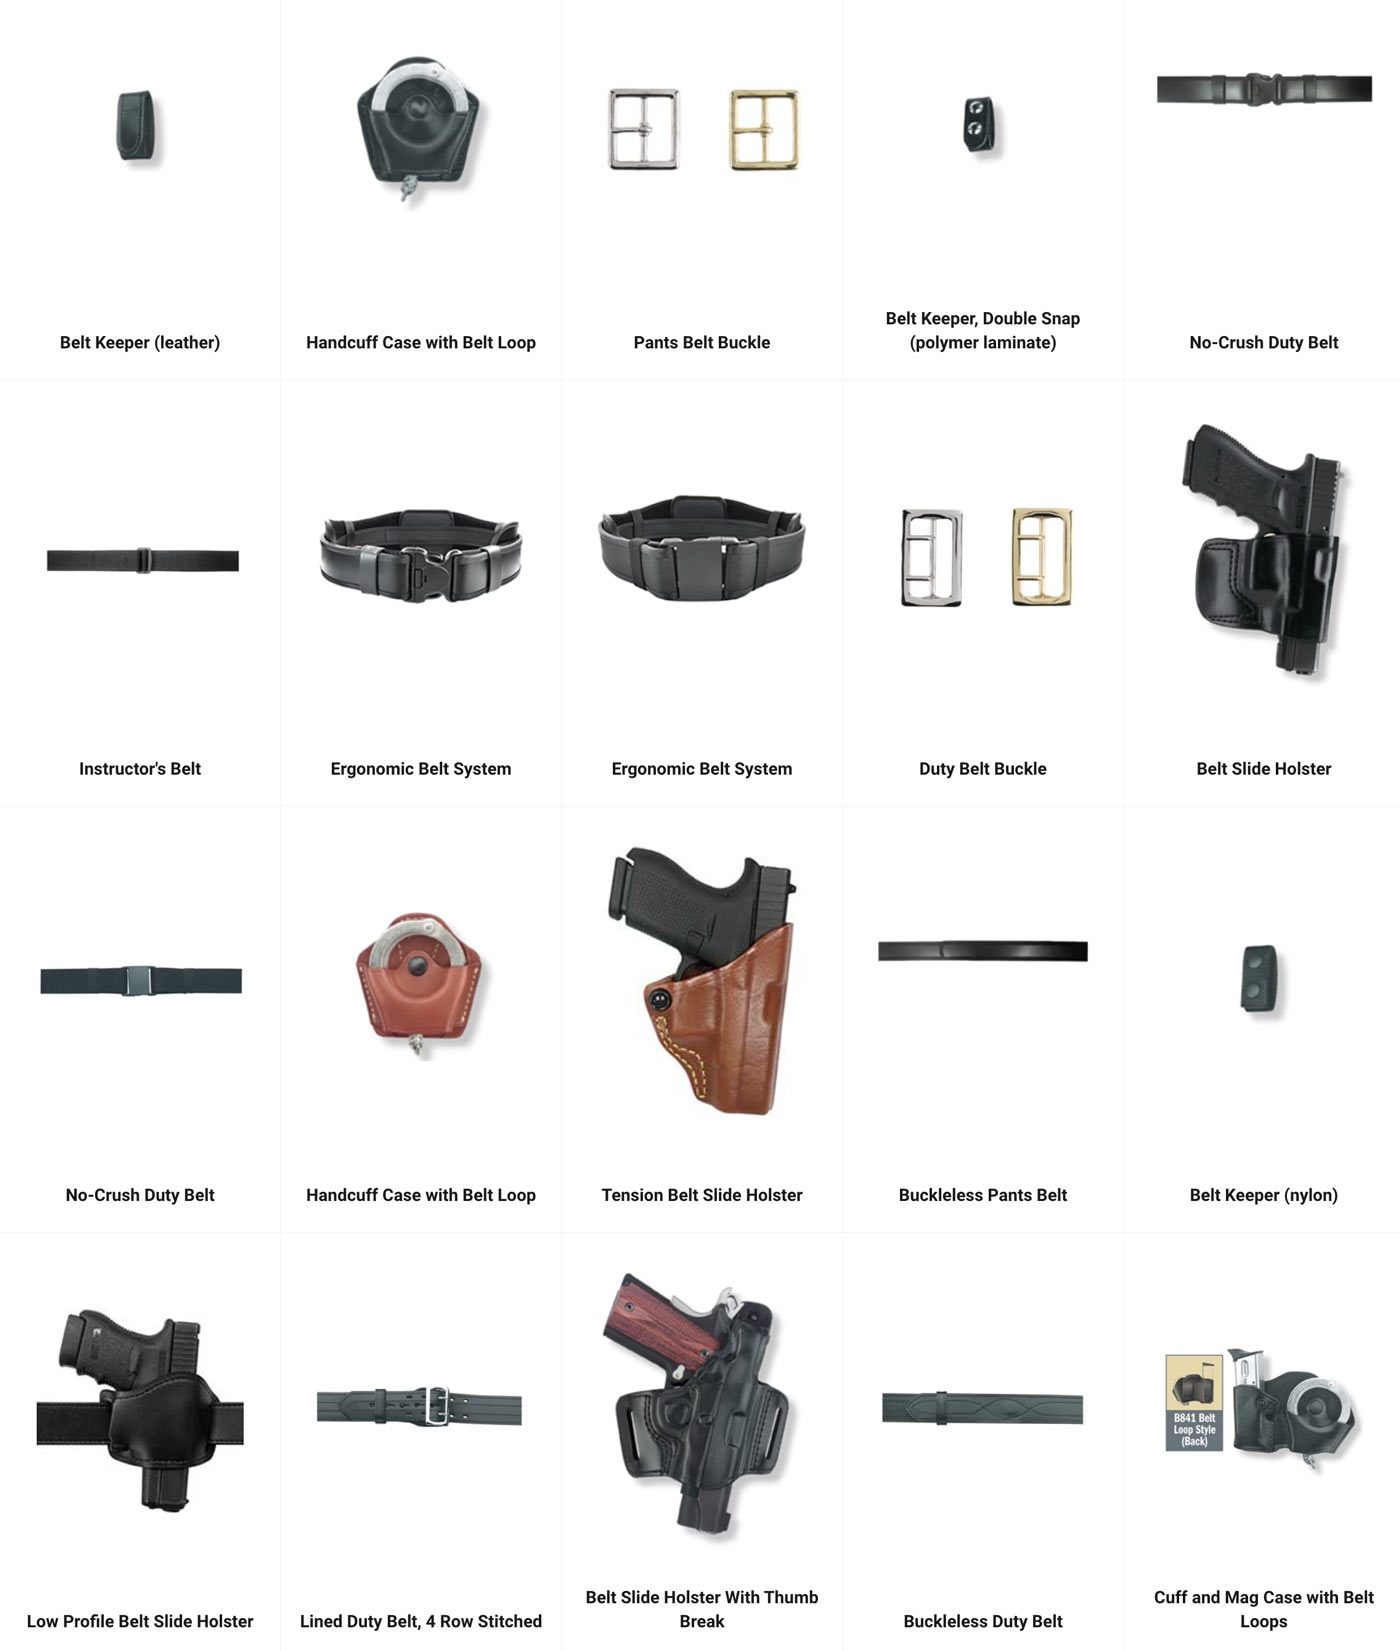 random products group showing belts and duty gear accessories